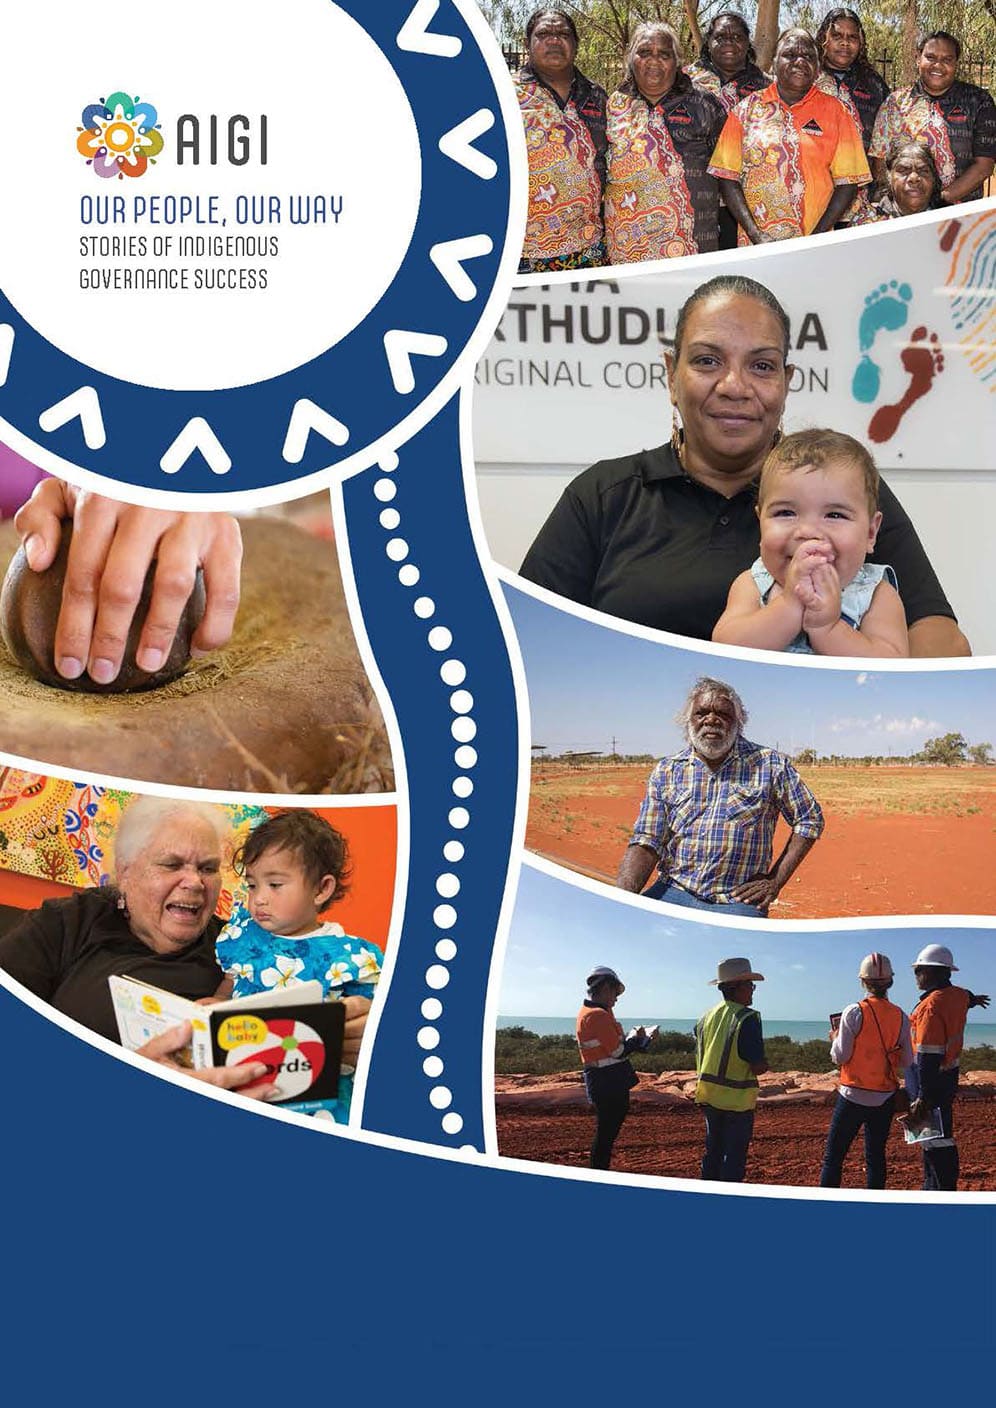 OUR PEOPLE, OUR WAY: STORIES OF INDIGENOUS GOVERNANCE SUCCESS